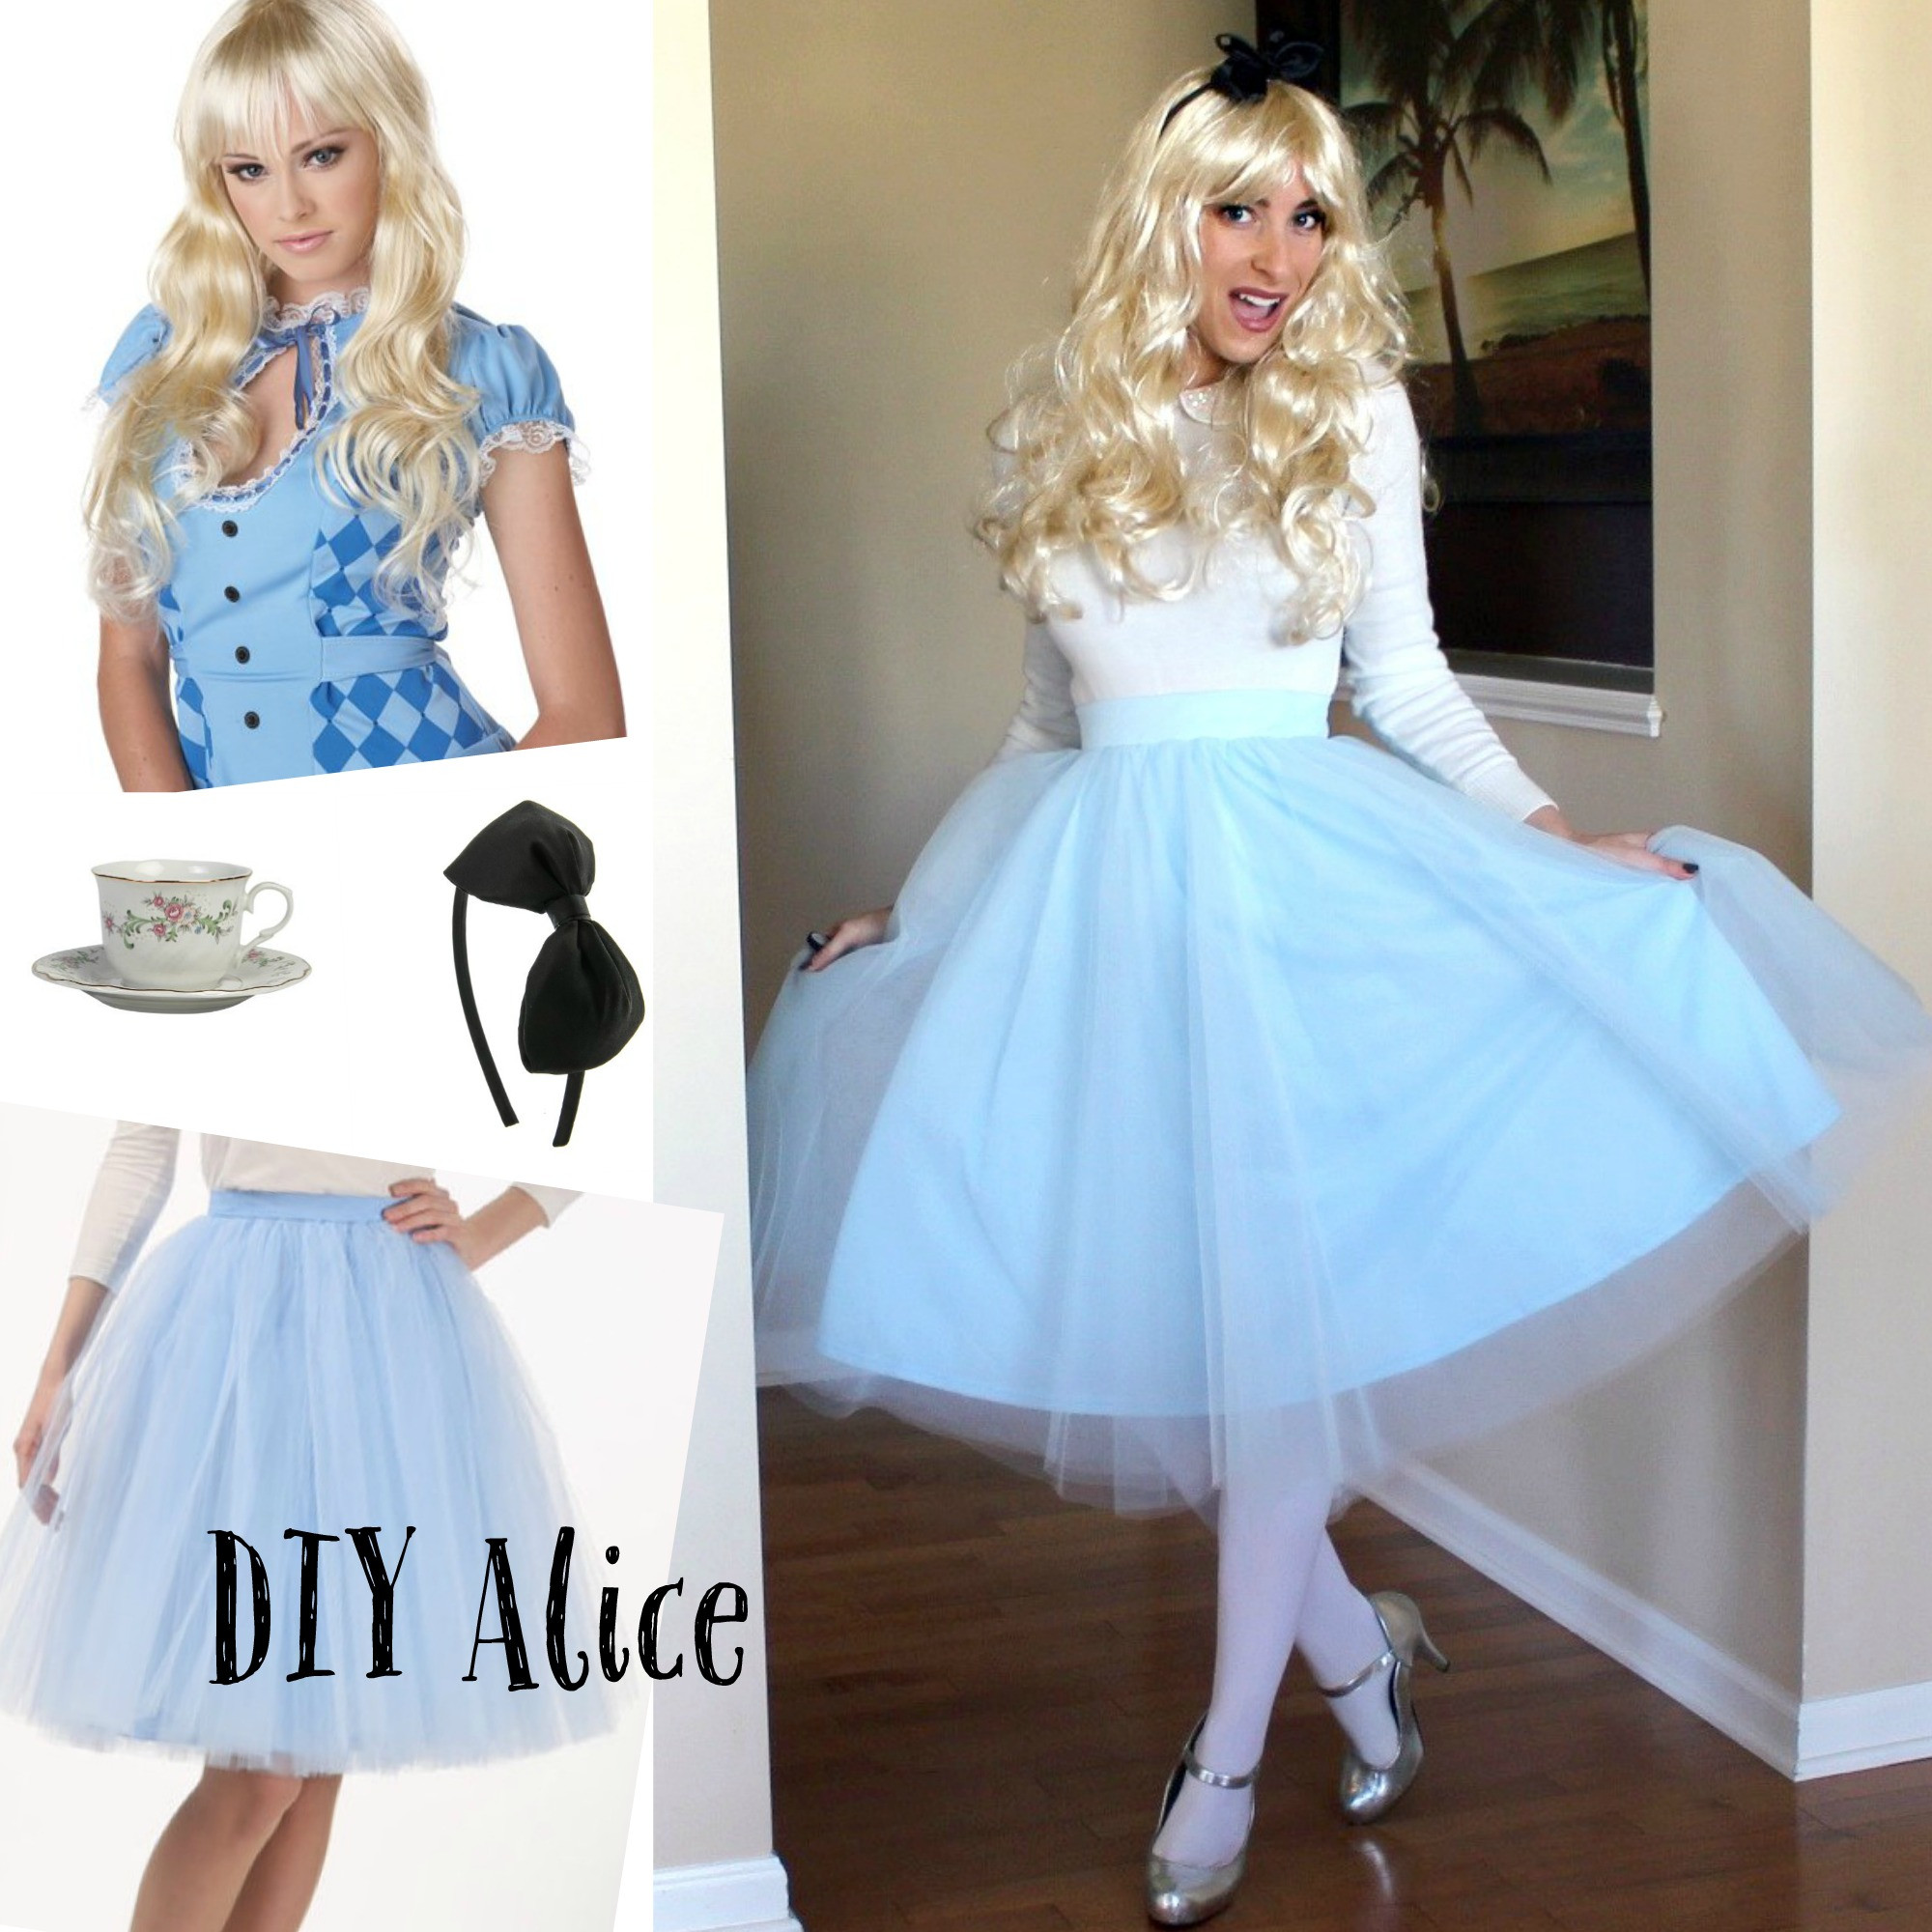 Alice And Wonderland DIY Costume
 Pepperminting Blog Archive Minnie & Alice Easy DIY